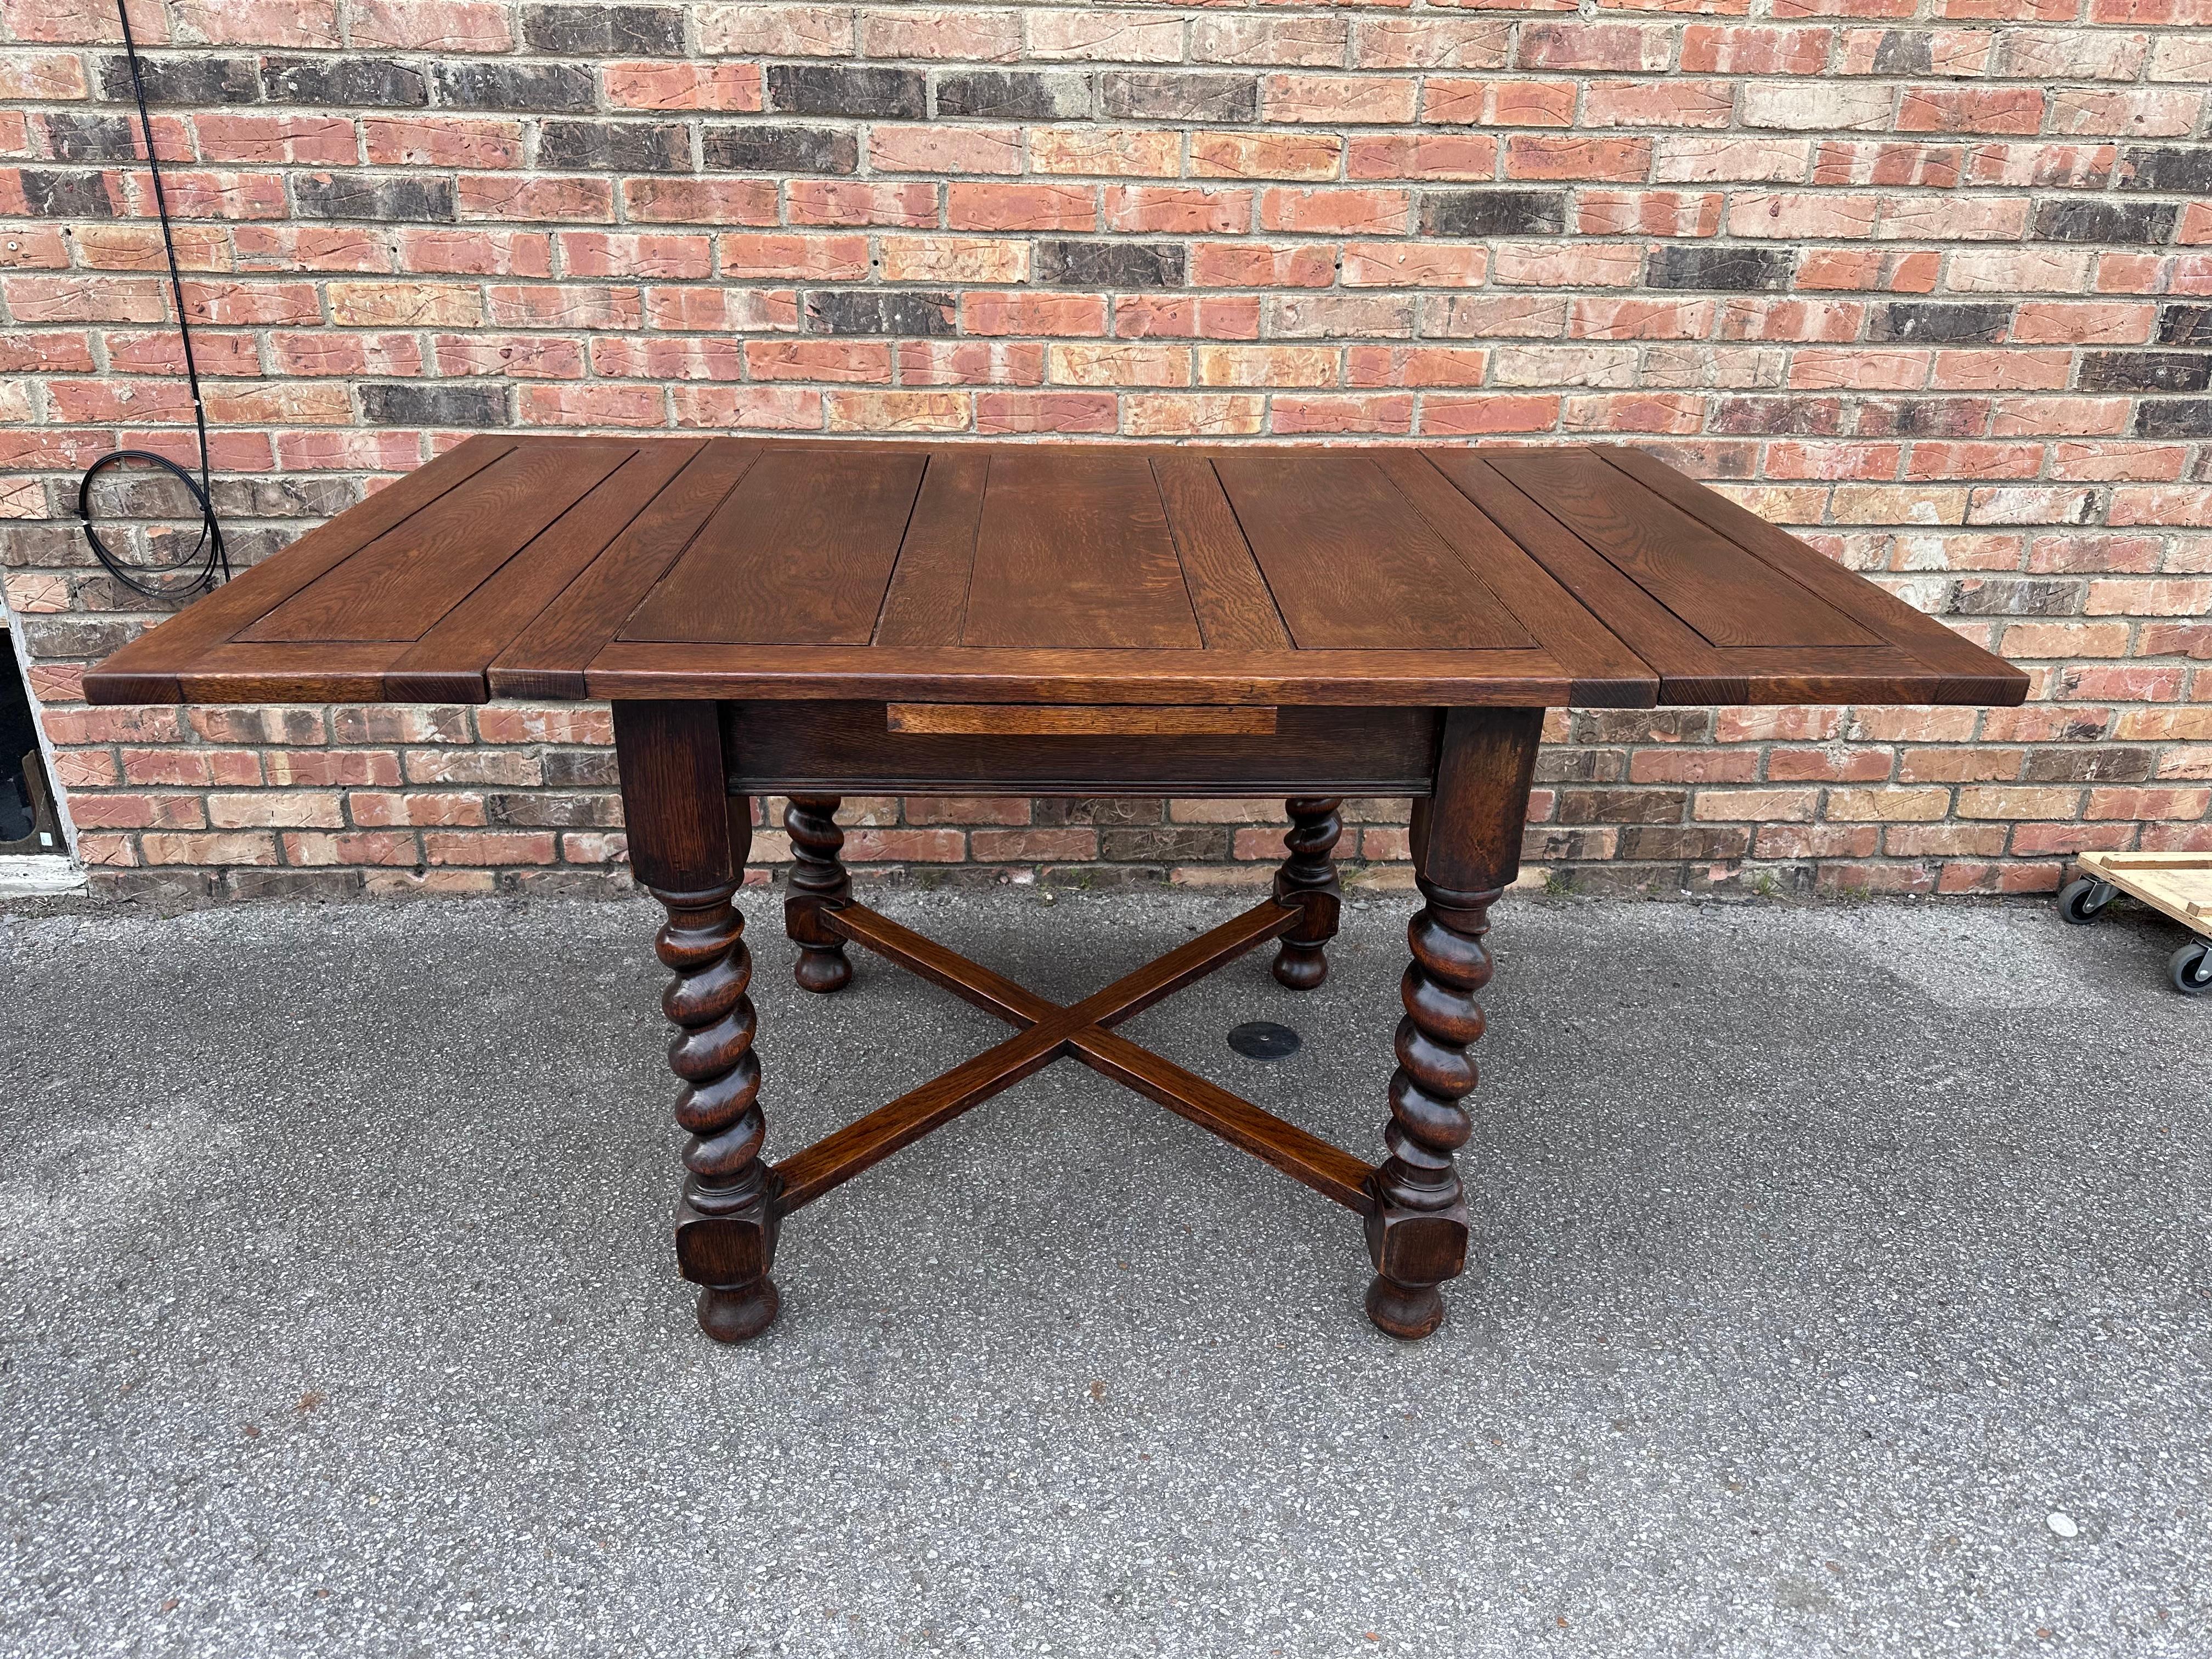 This is a great little English game table/draw leaf table measures 60' with both leafs extended. The wood is dark oak the legs are a beautifully turned barley twist with nice age and patina.These tables are very versatile and offer many uses from